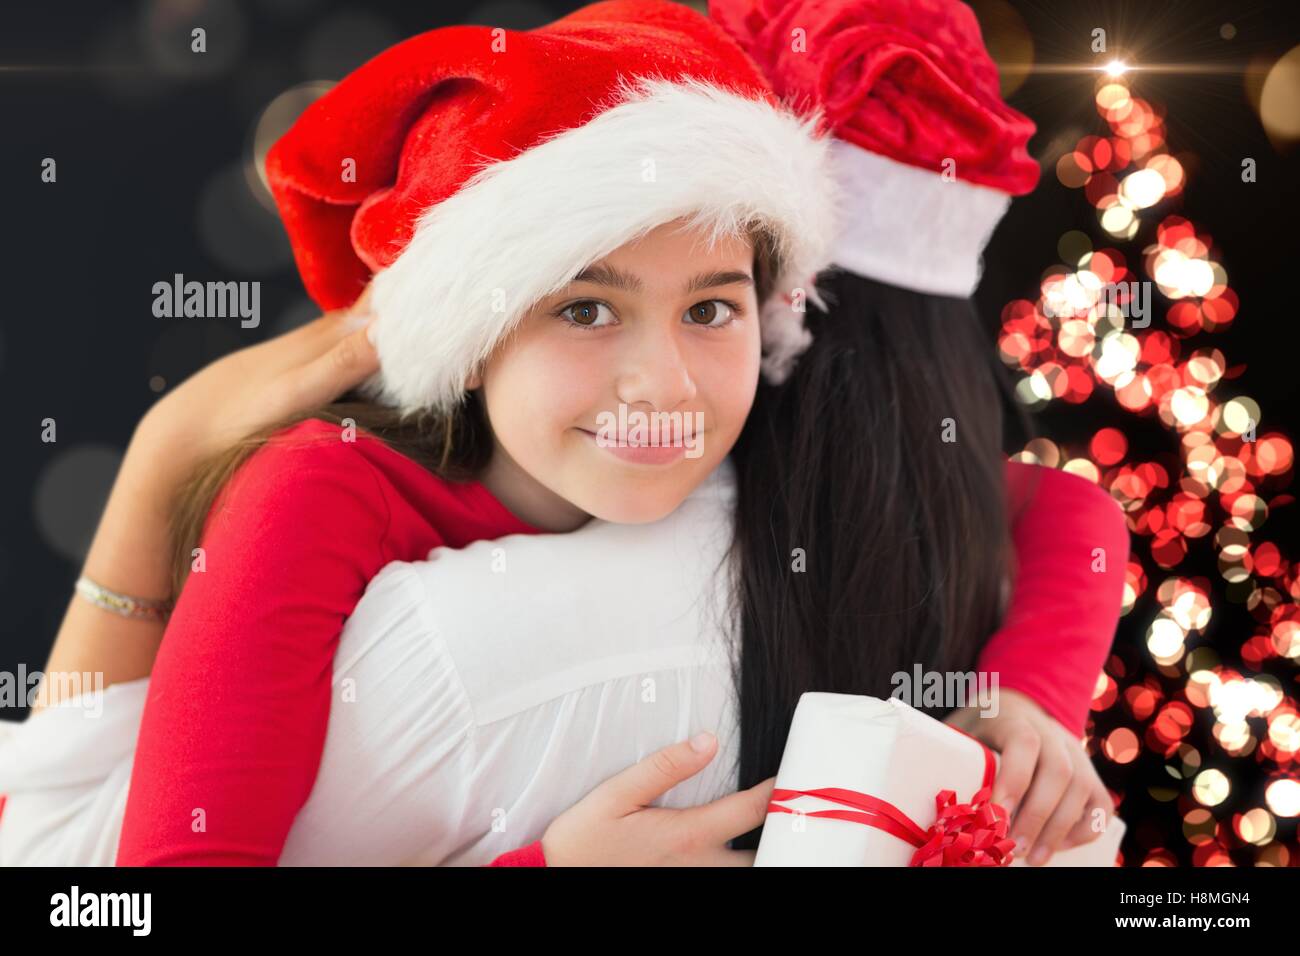 Mother and daughter in santa hat embracing each other Stock Photo